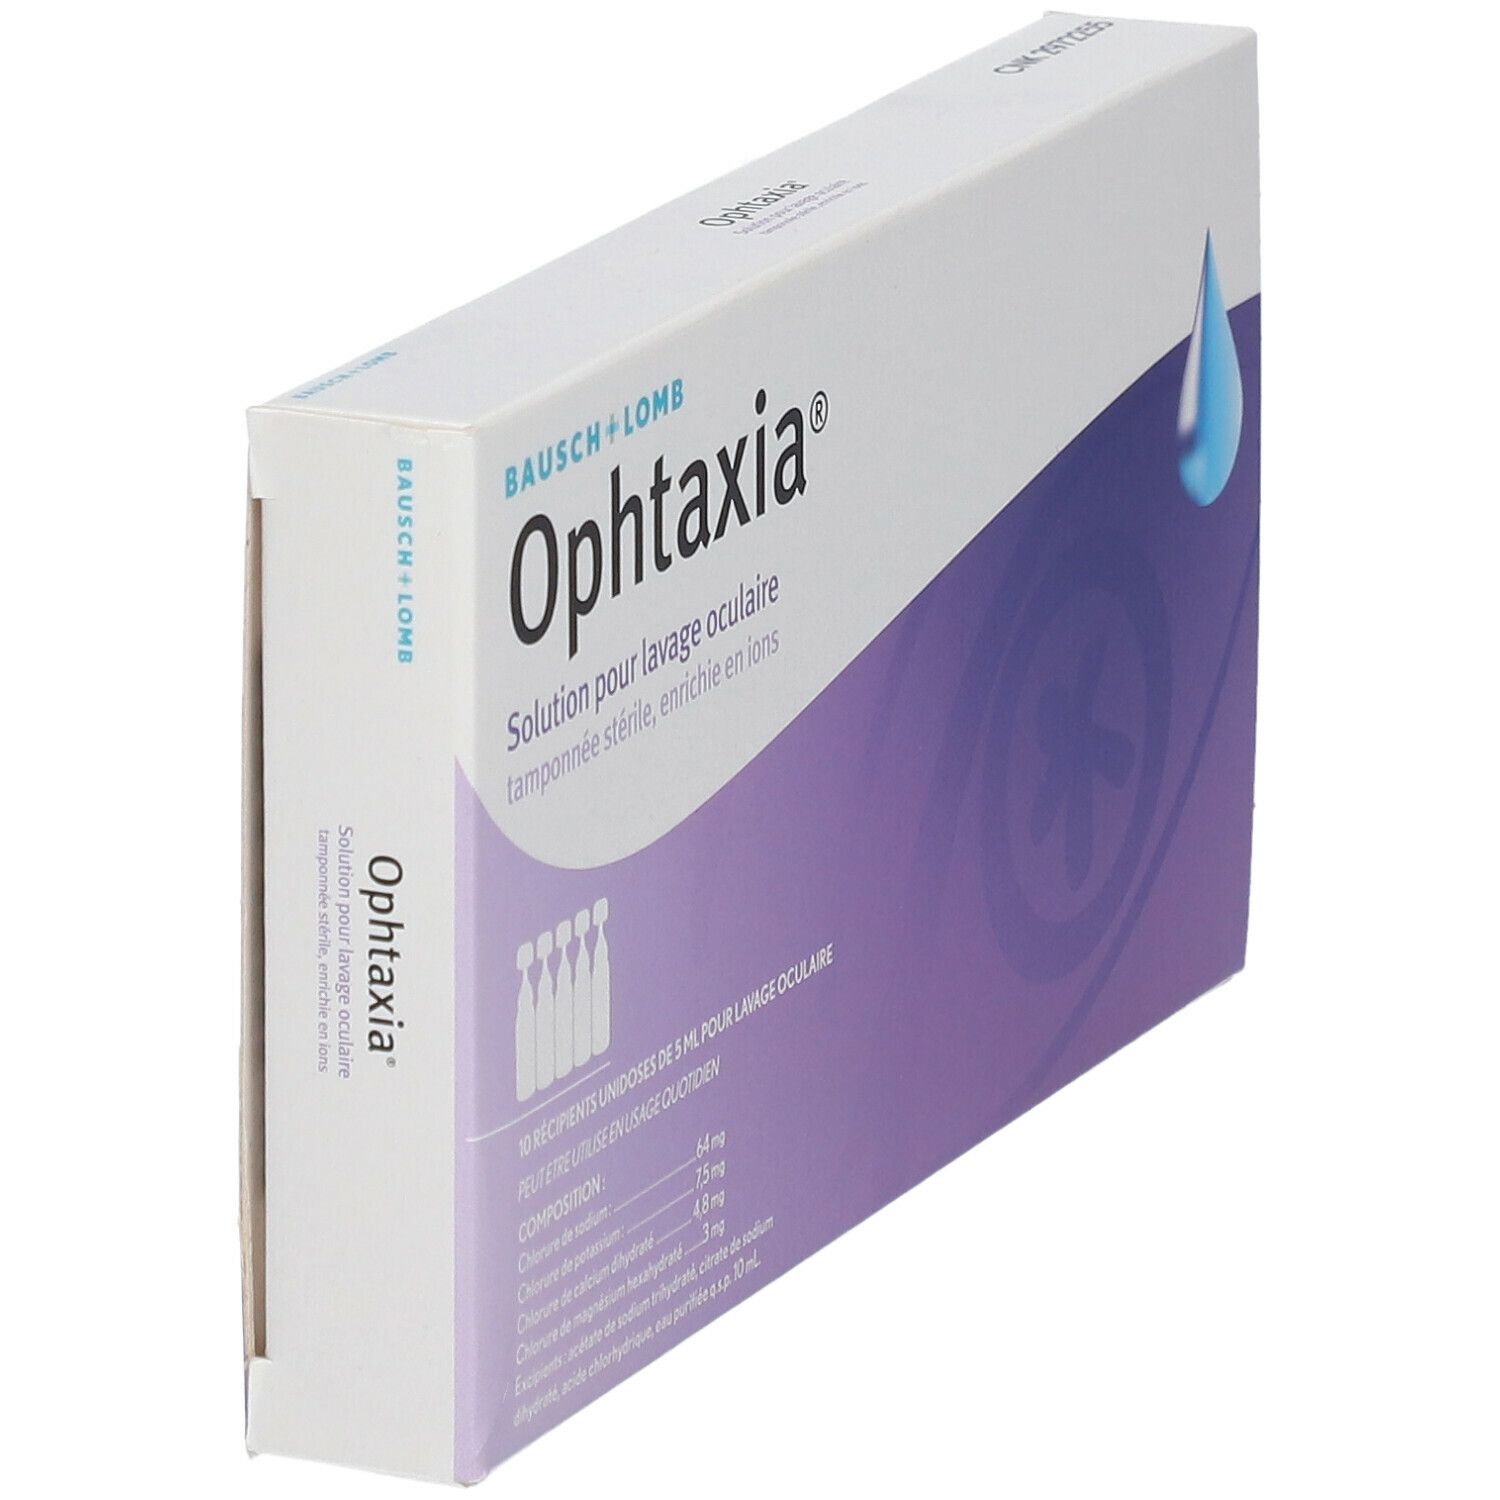 Ophtaxia Lavage Oculaire - 10 Unidoses